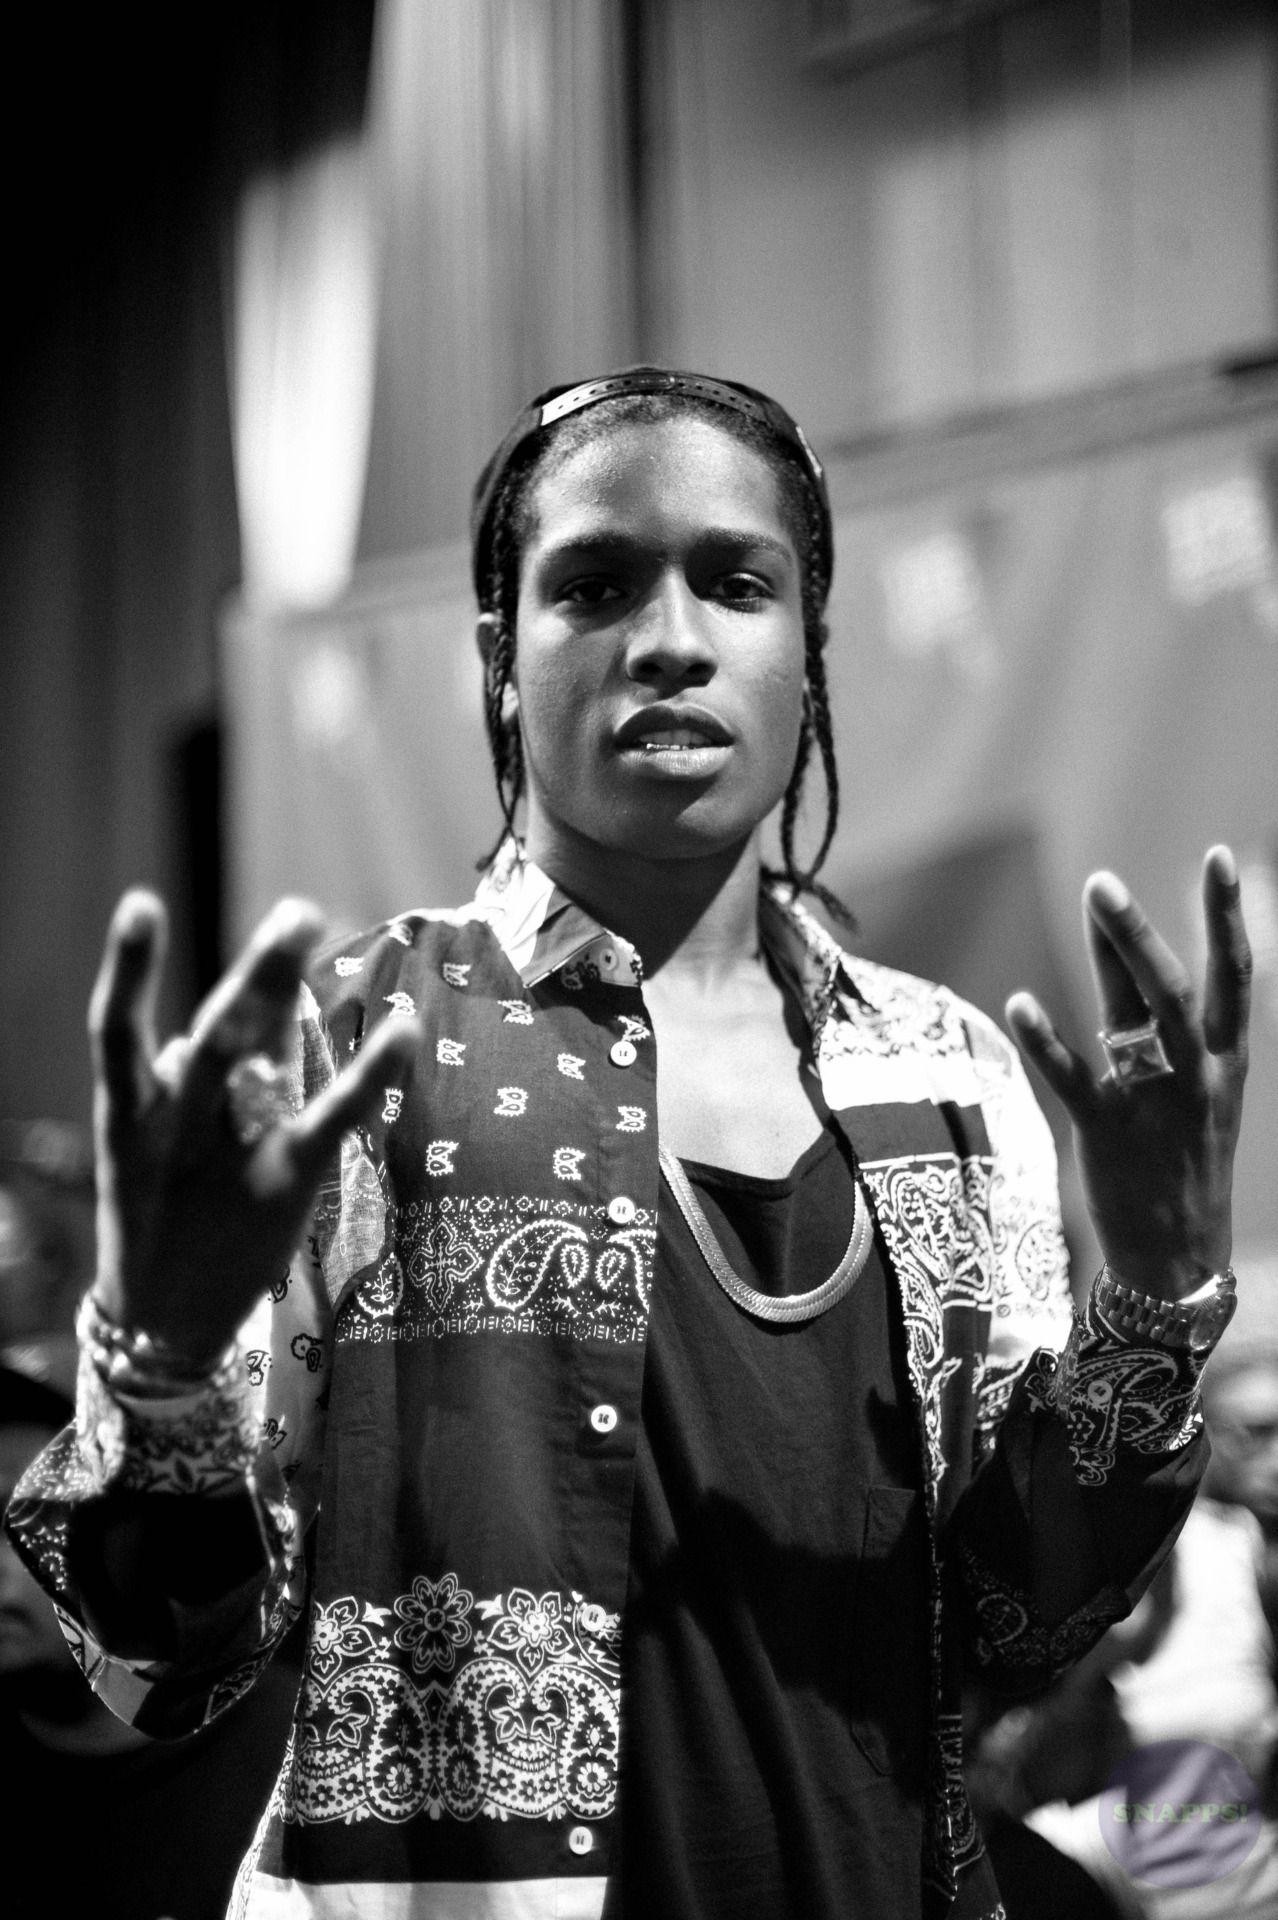 Asap Rocky Wallpapers For Iphone 7, Iphone 7 Plus, - Asap Rocky West Side - HD Wallpaper 